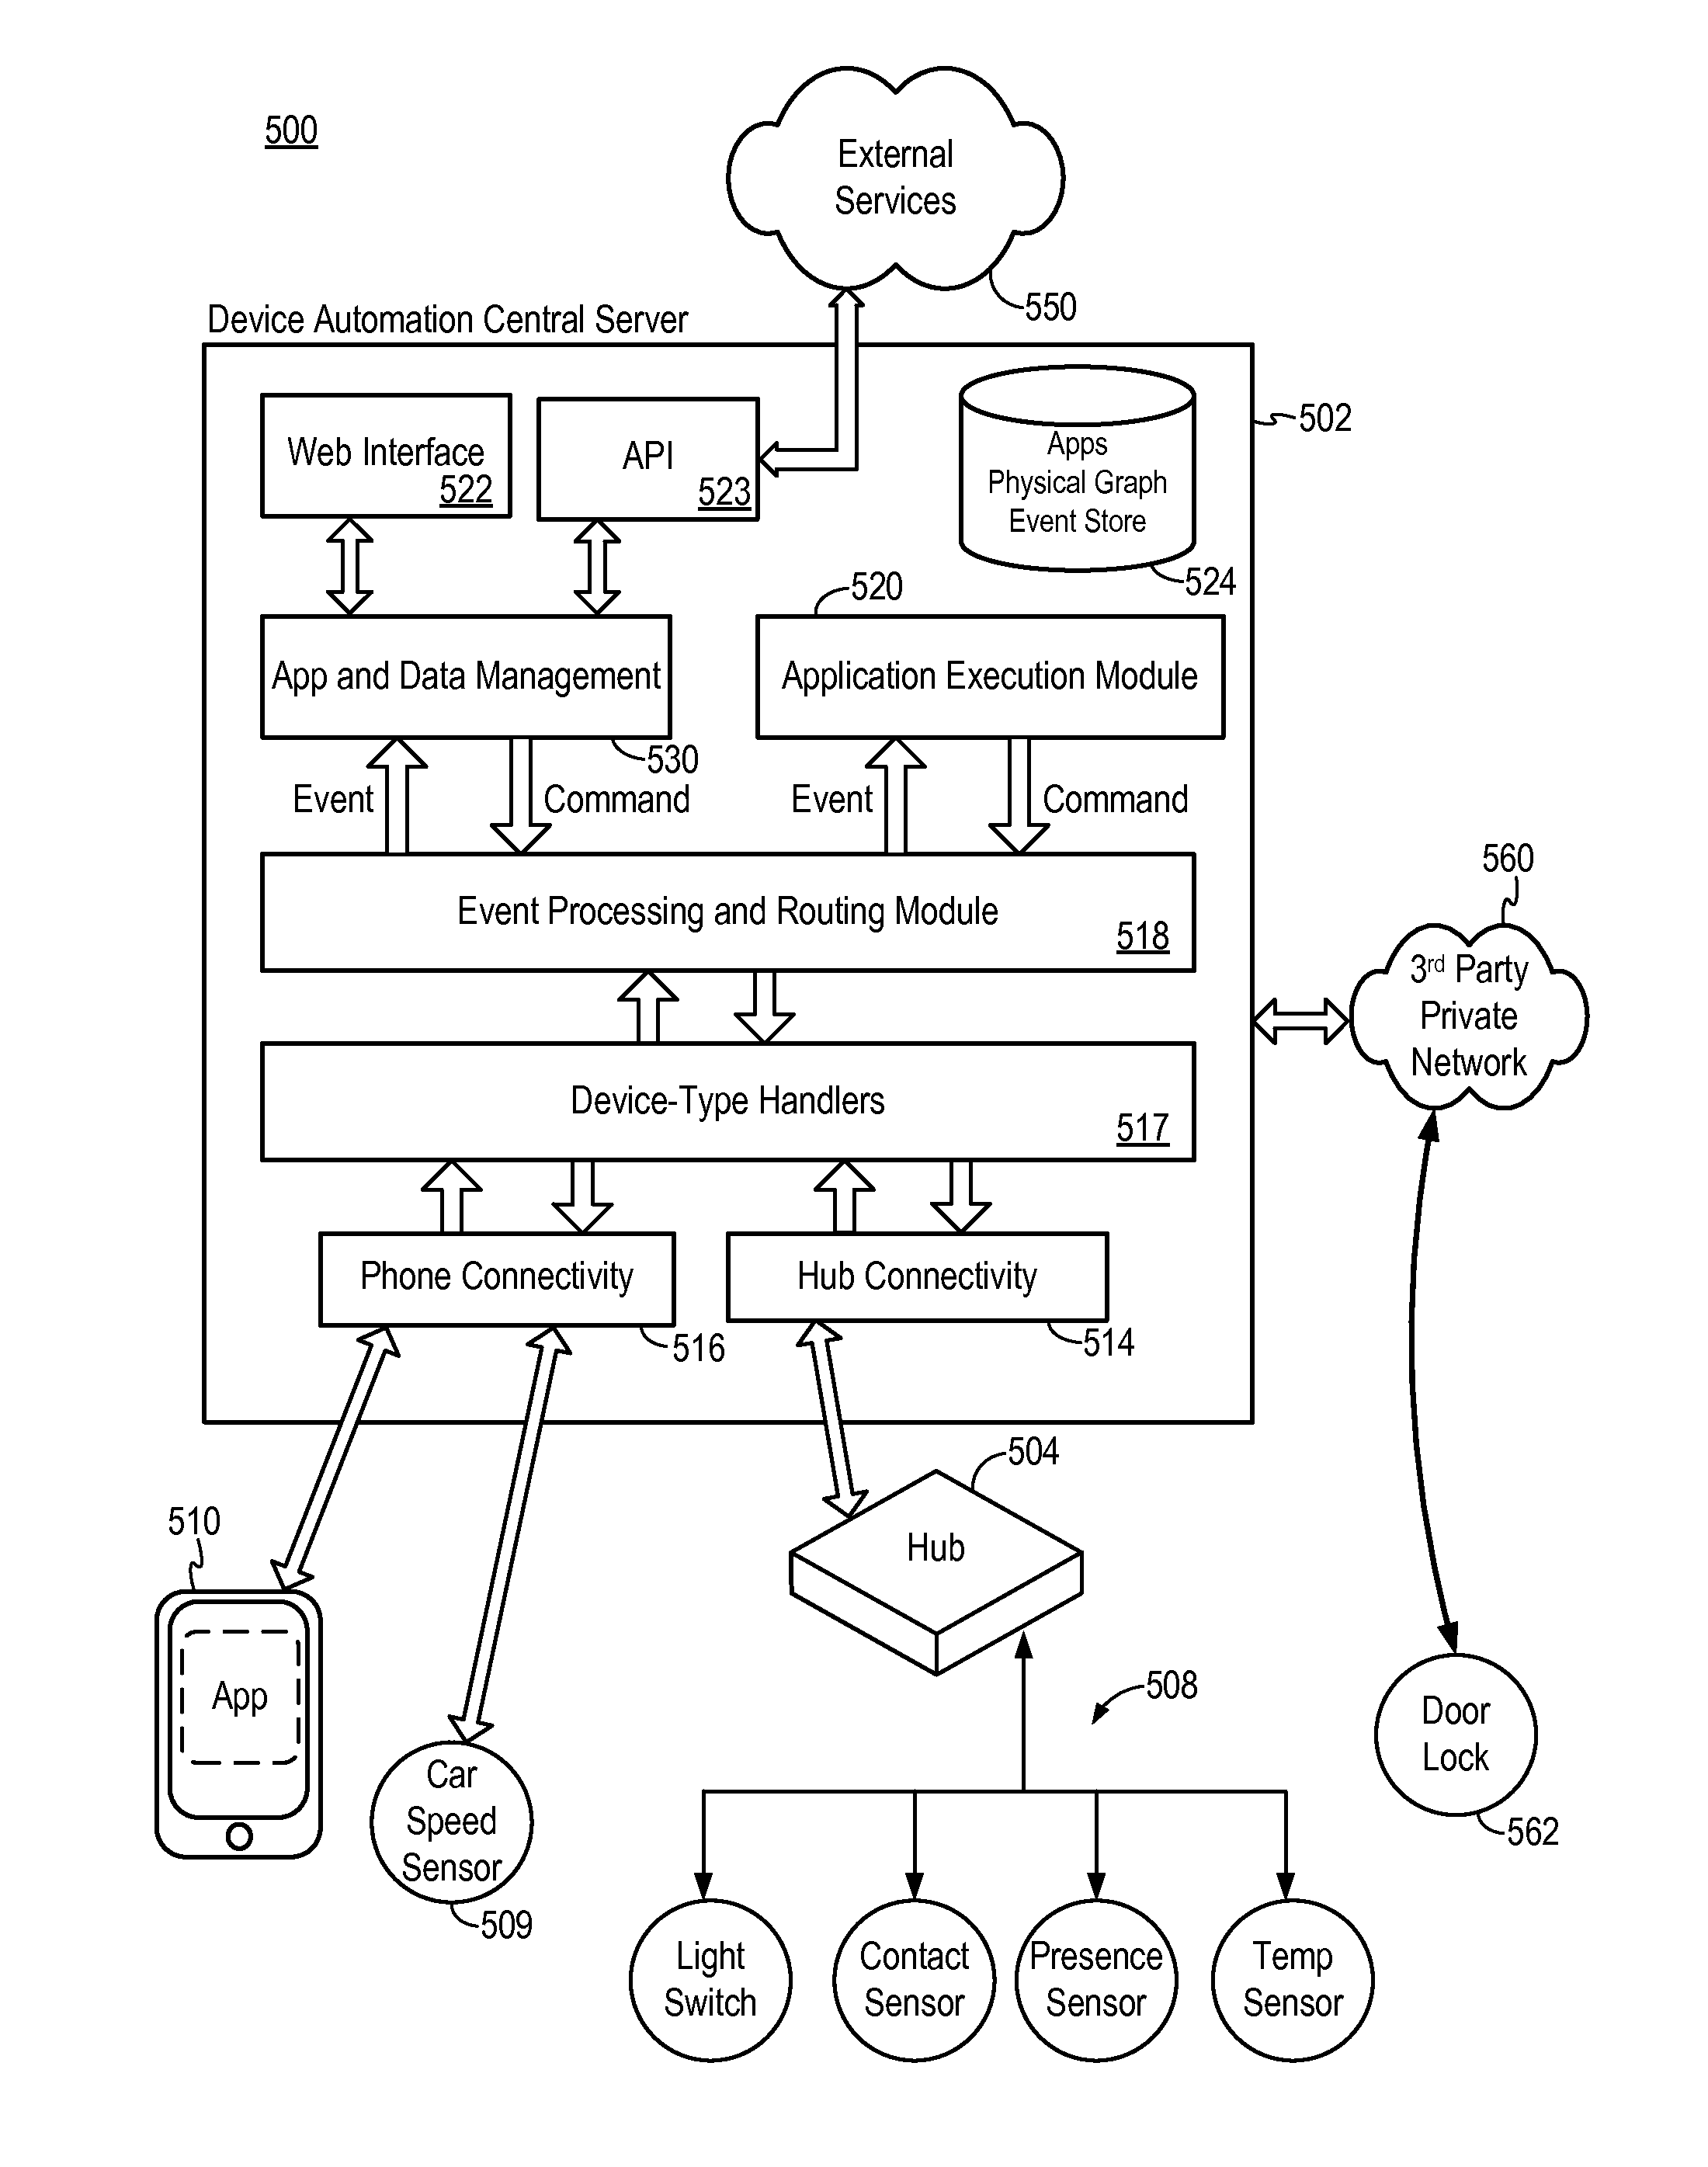 Device-type handlers for remote control and monitoring of devices through a data network